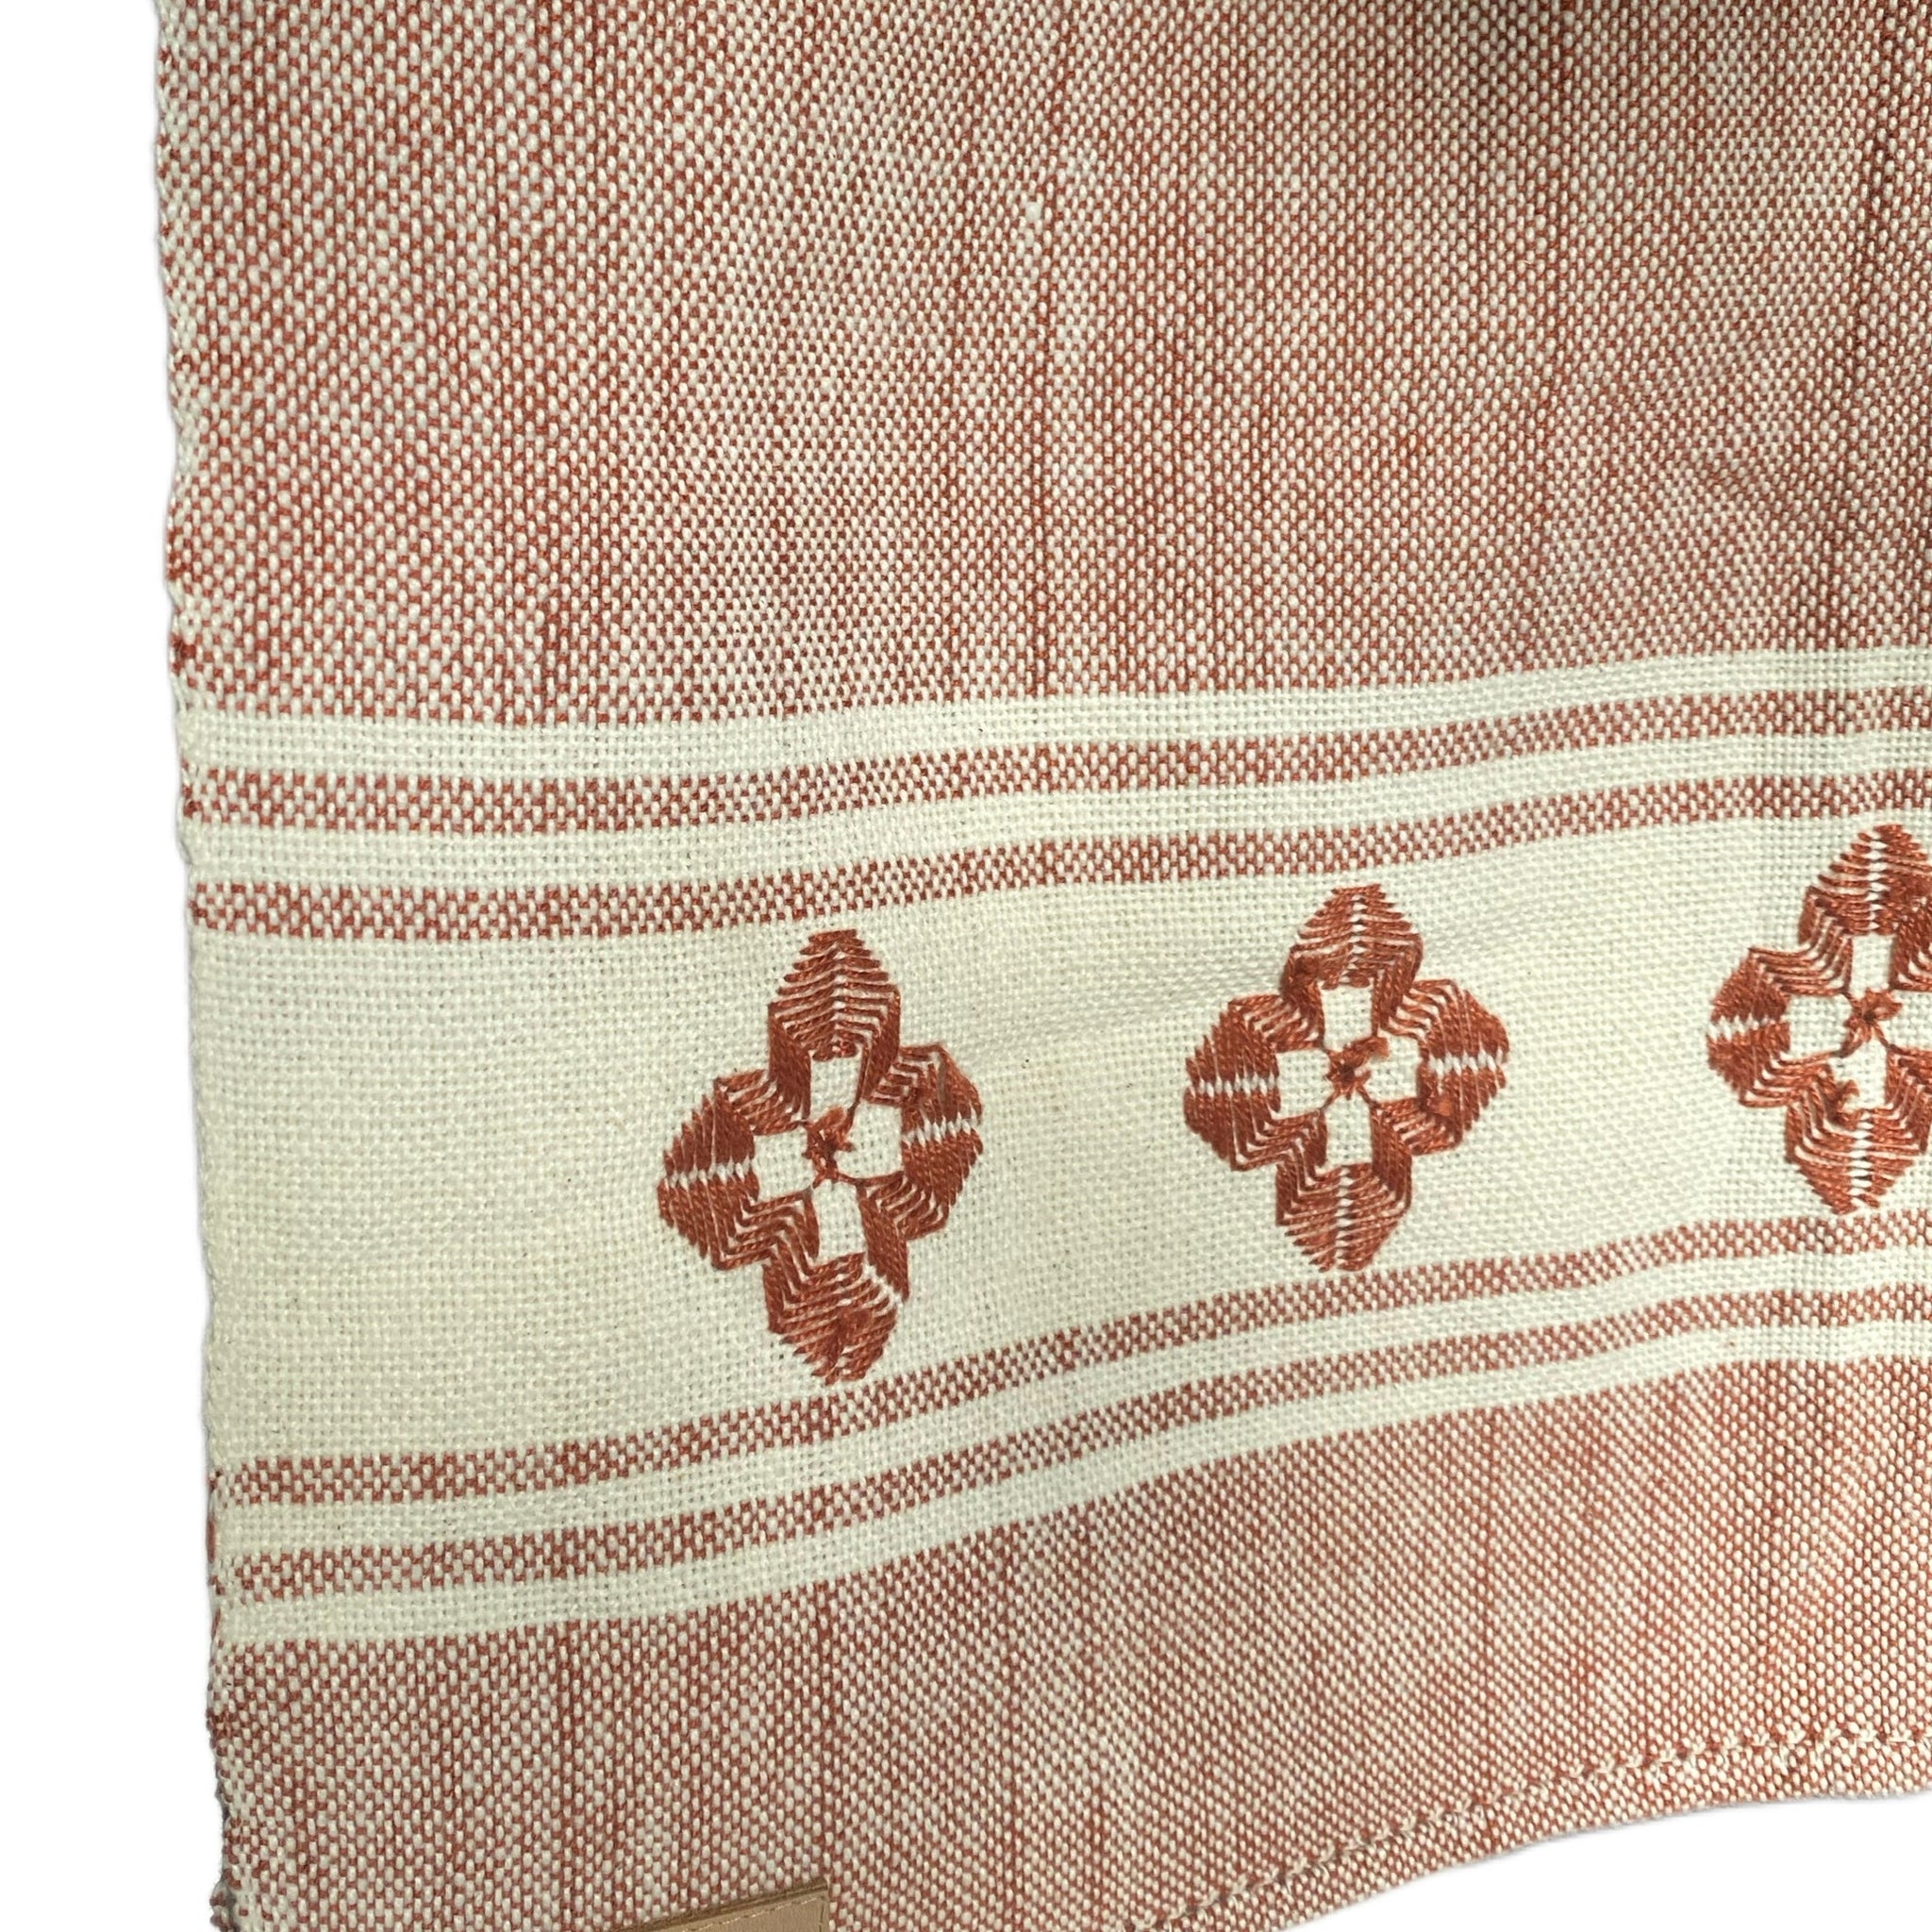 ROAD AND/OR BLANKET OF AUTHENTIC AO PO'I FABRIC ¨MARGARITA¨ - G